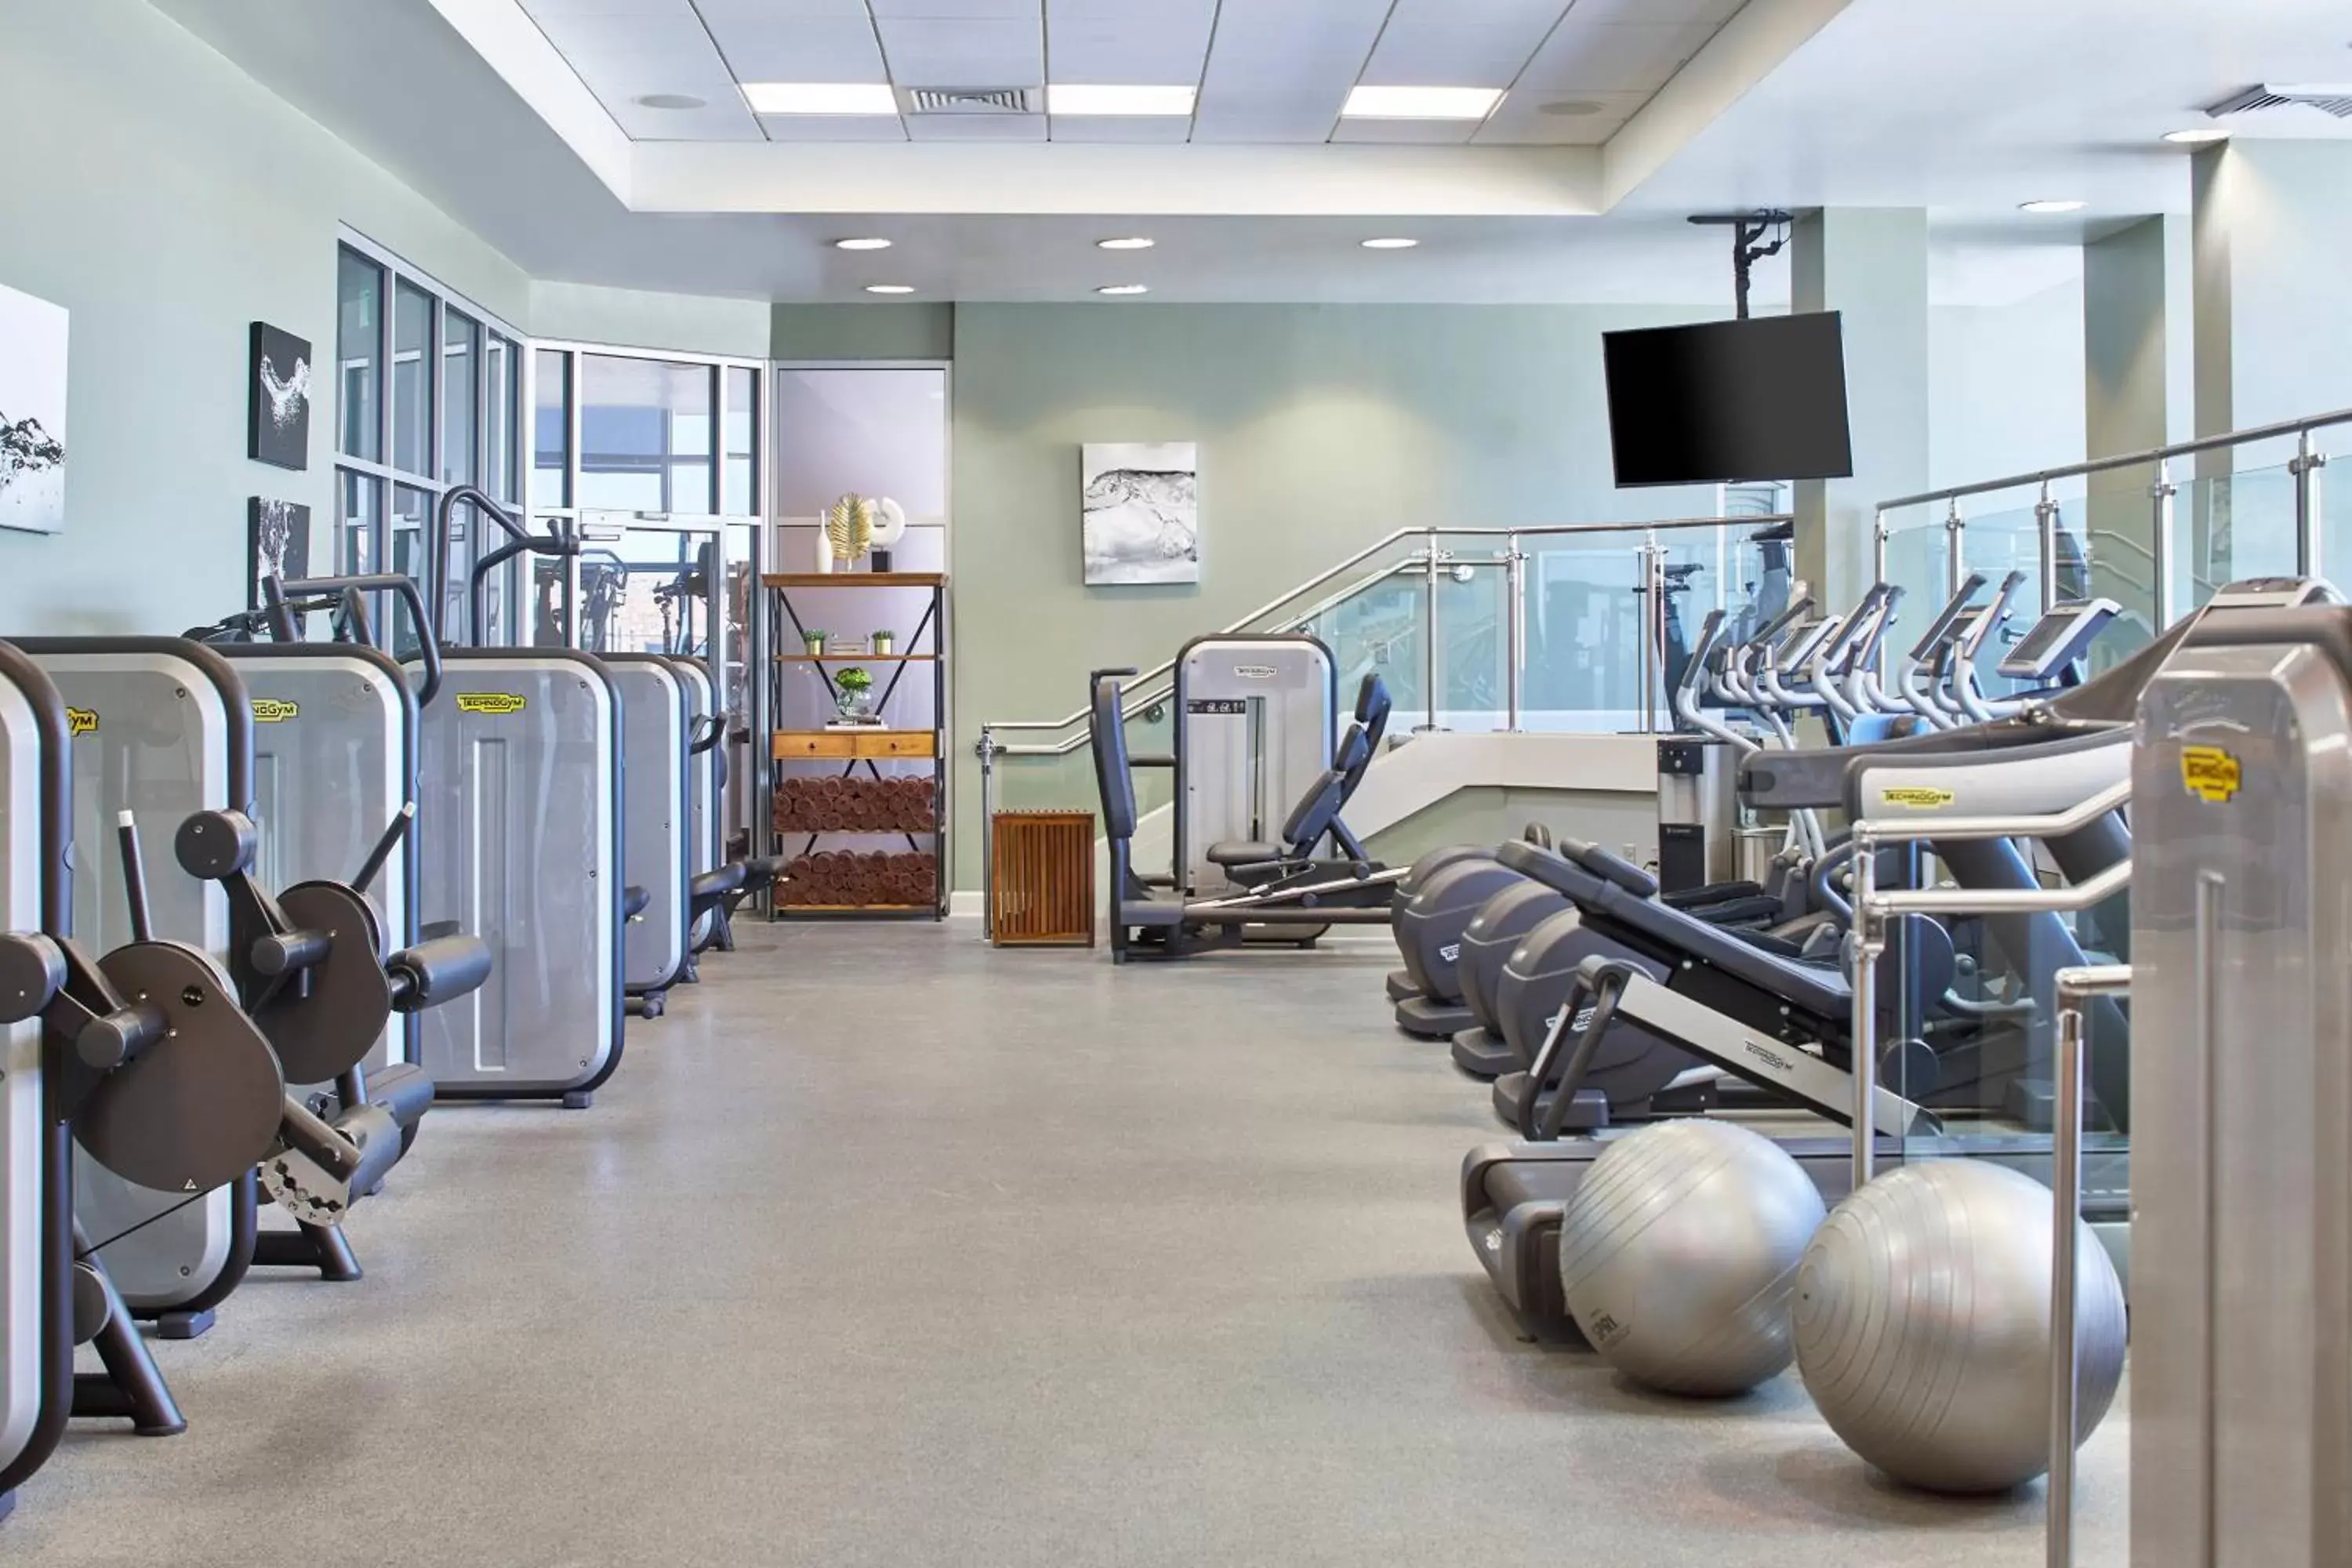 Fitness centre/facilities, Fitness Center/Facilities in The Battle House Renaissance Mobile Hotel & Spa